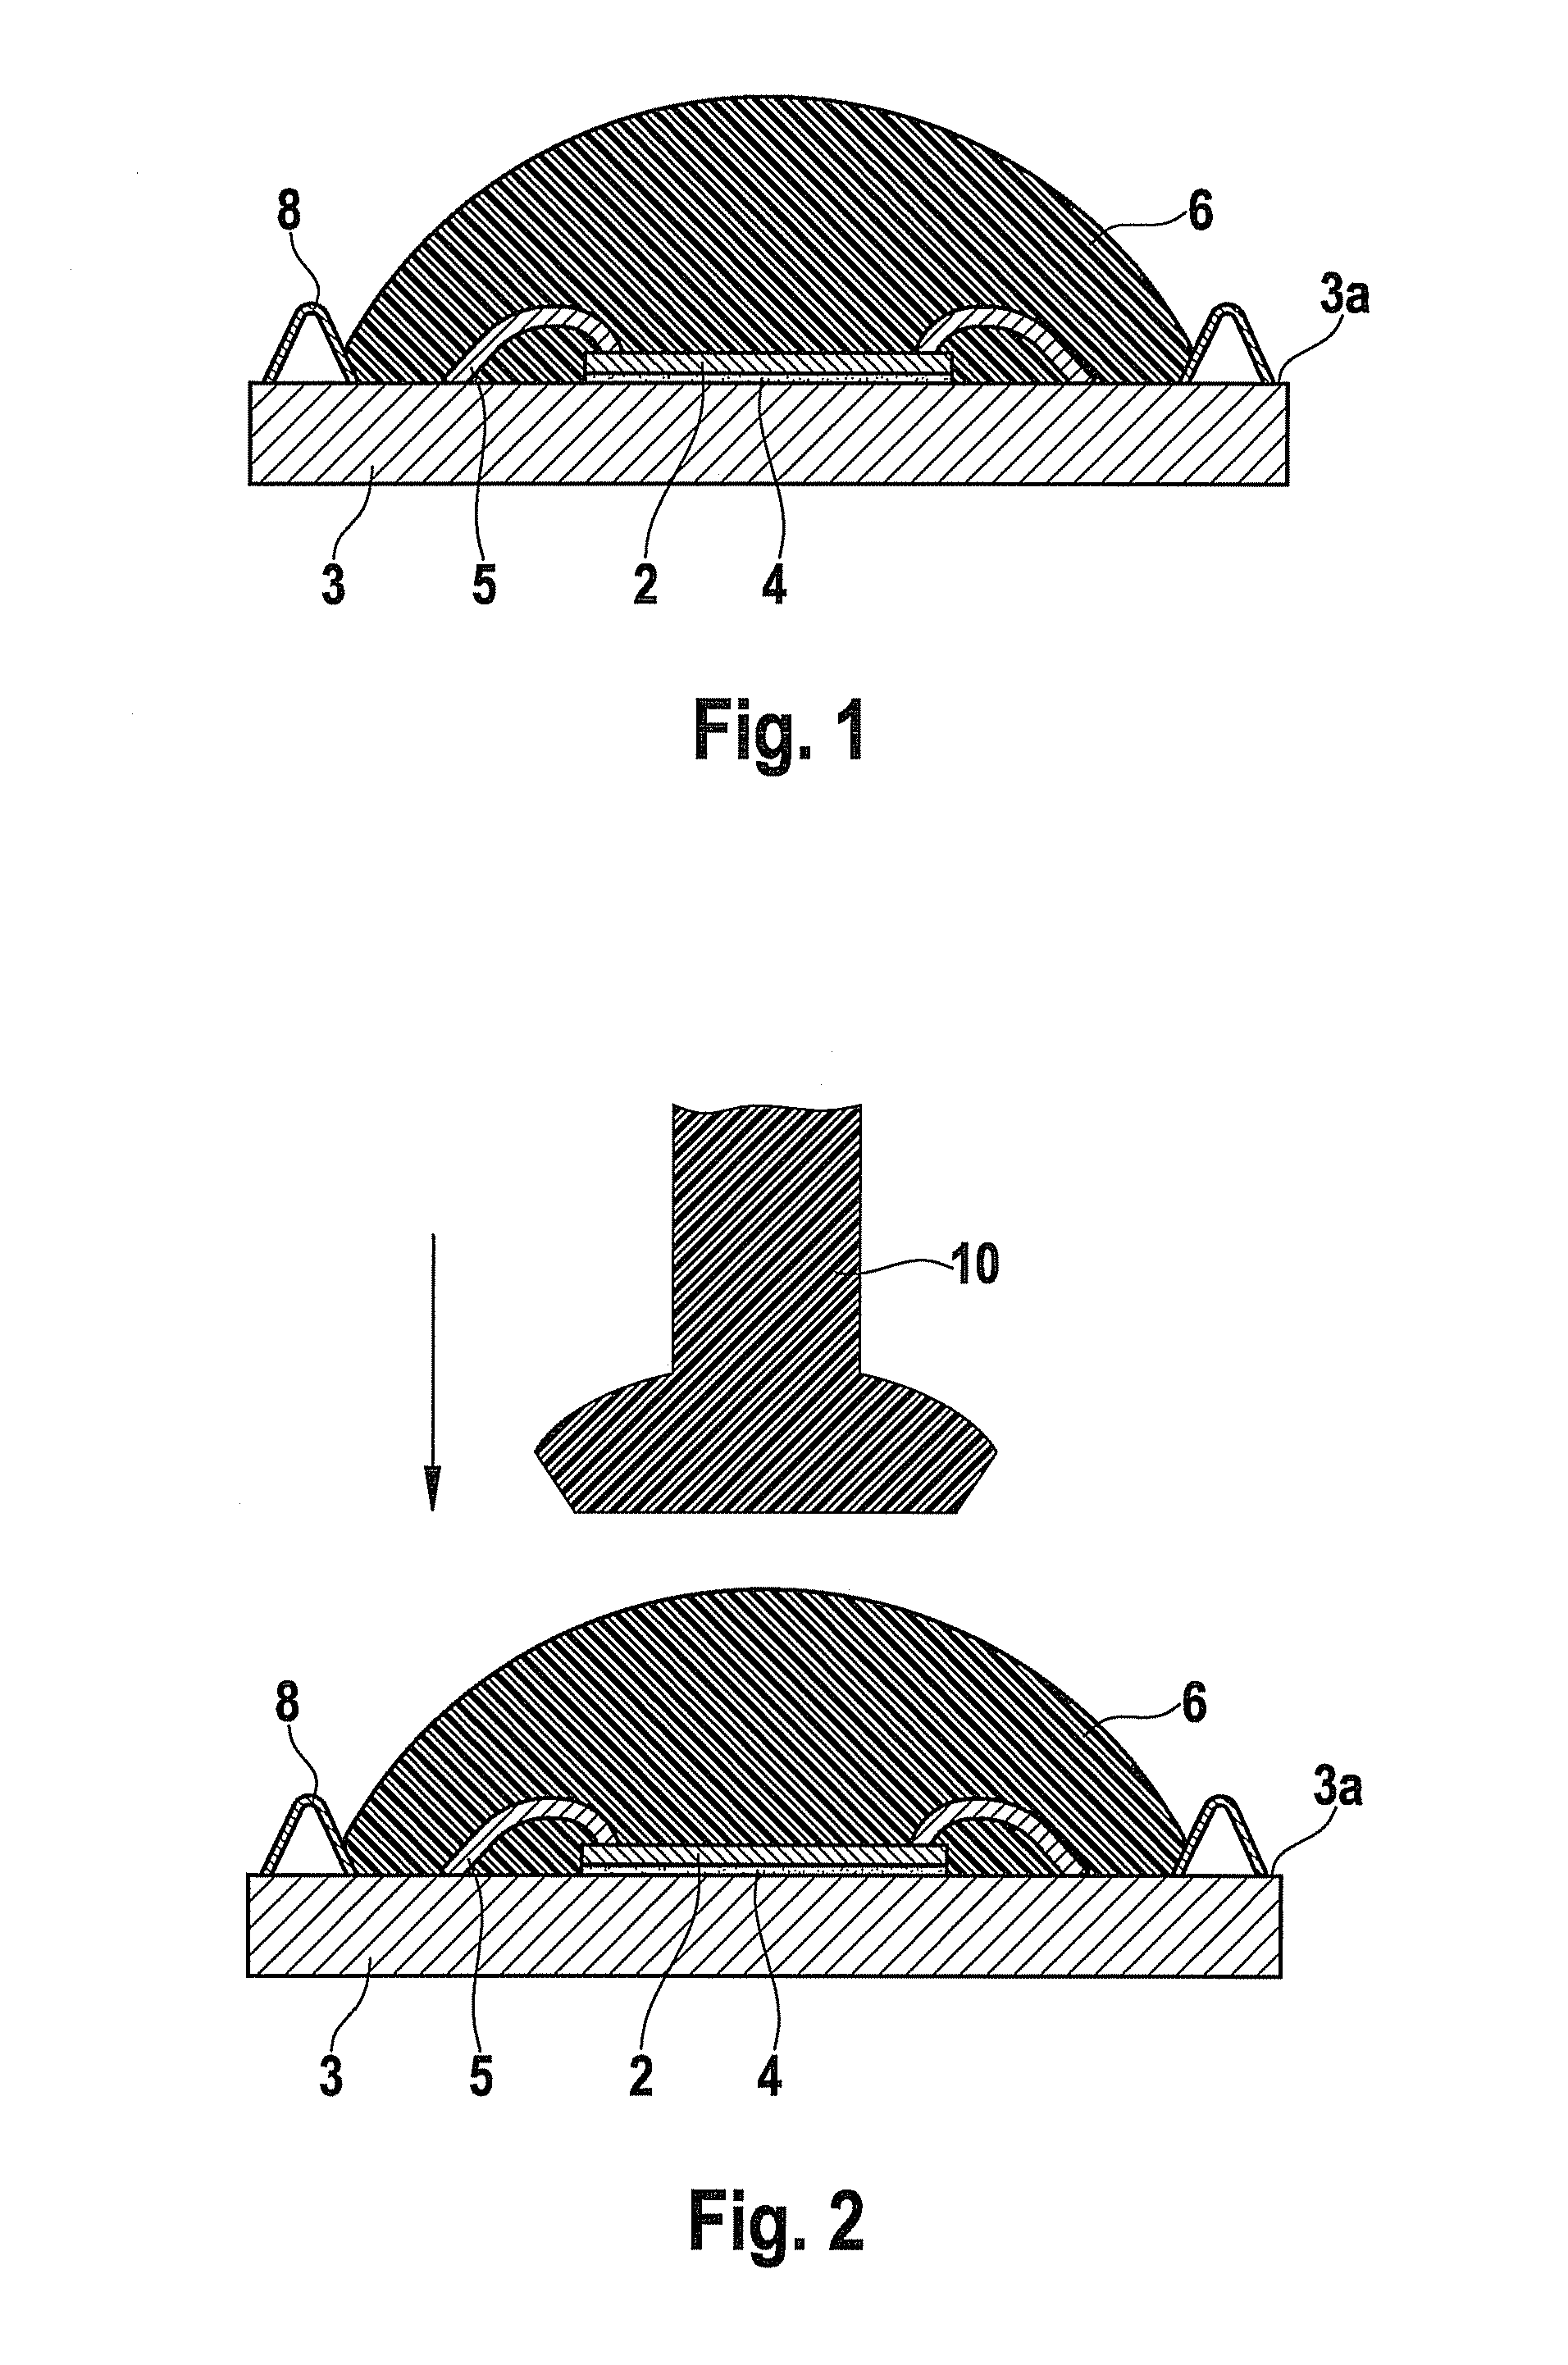 Image acquisition system and method for the manufacture thereof